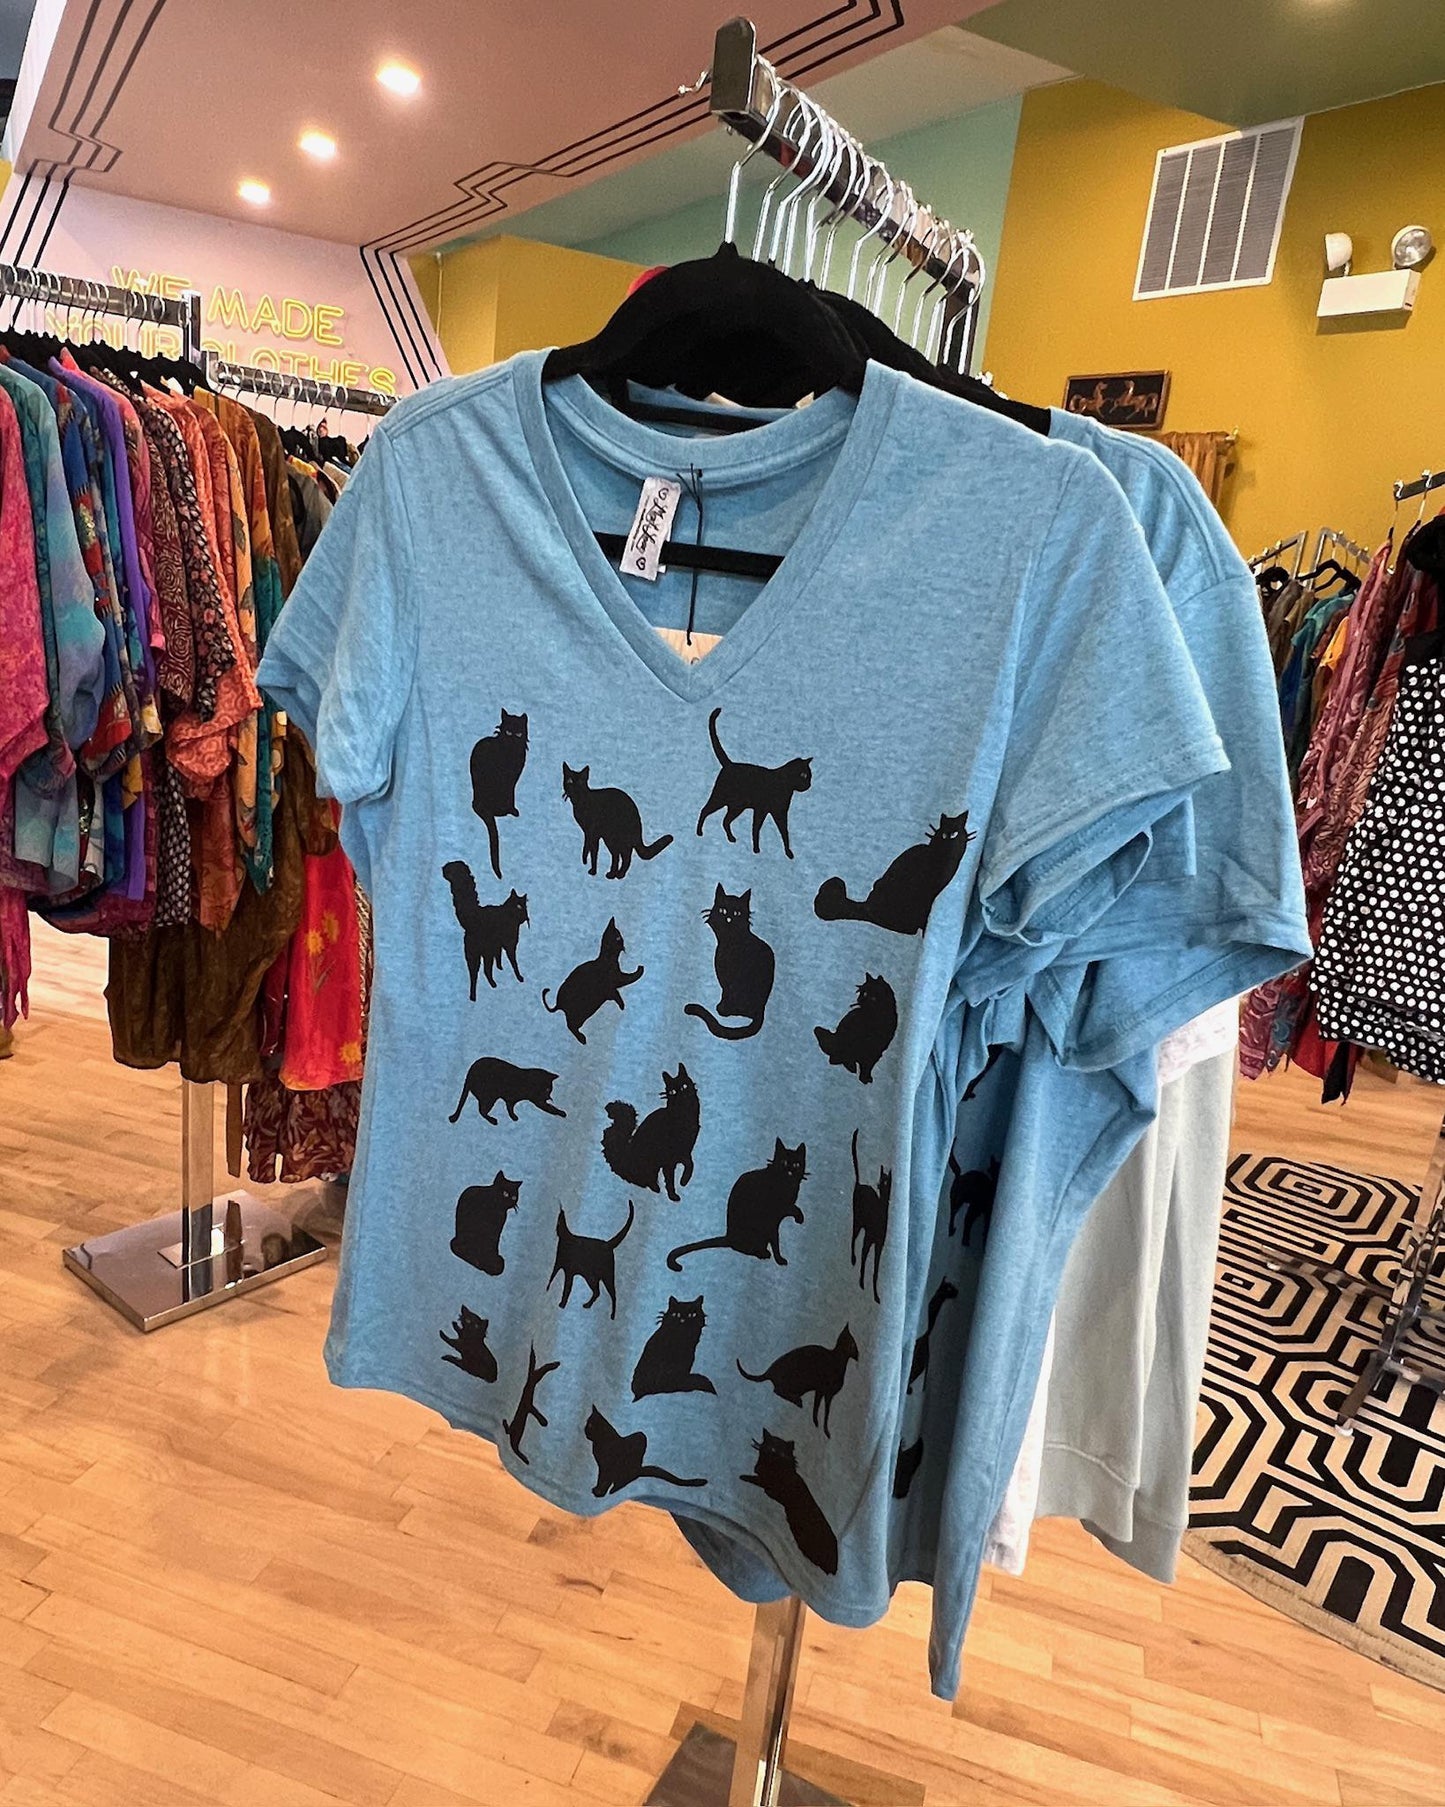 Mad Love Blue V Neck Tee With Cats